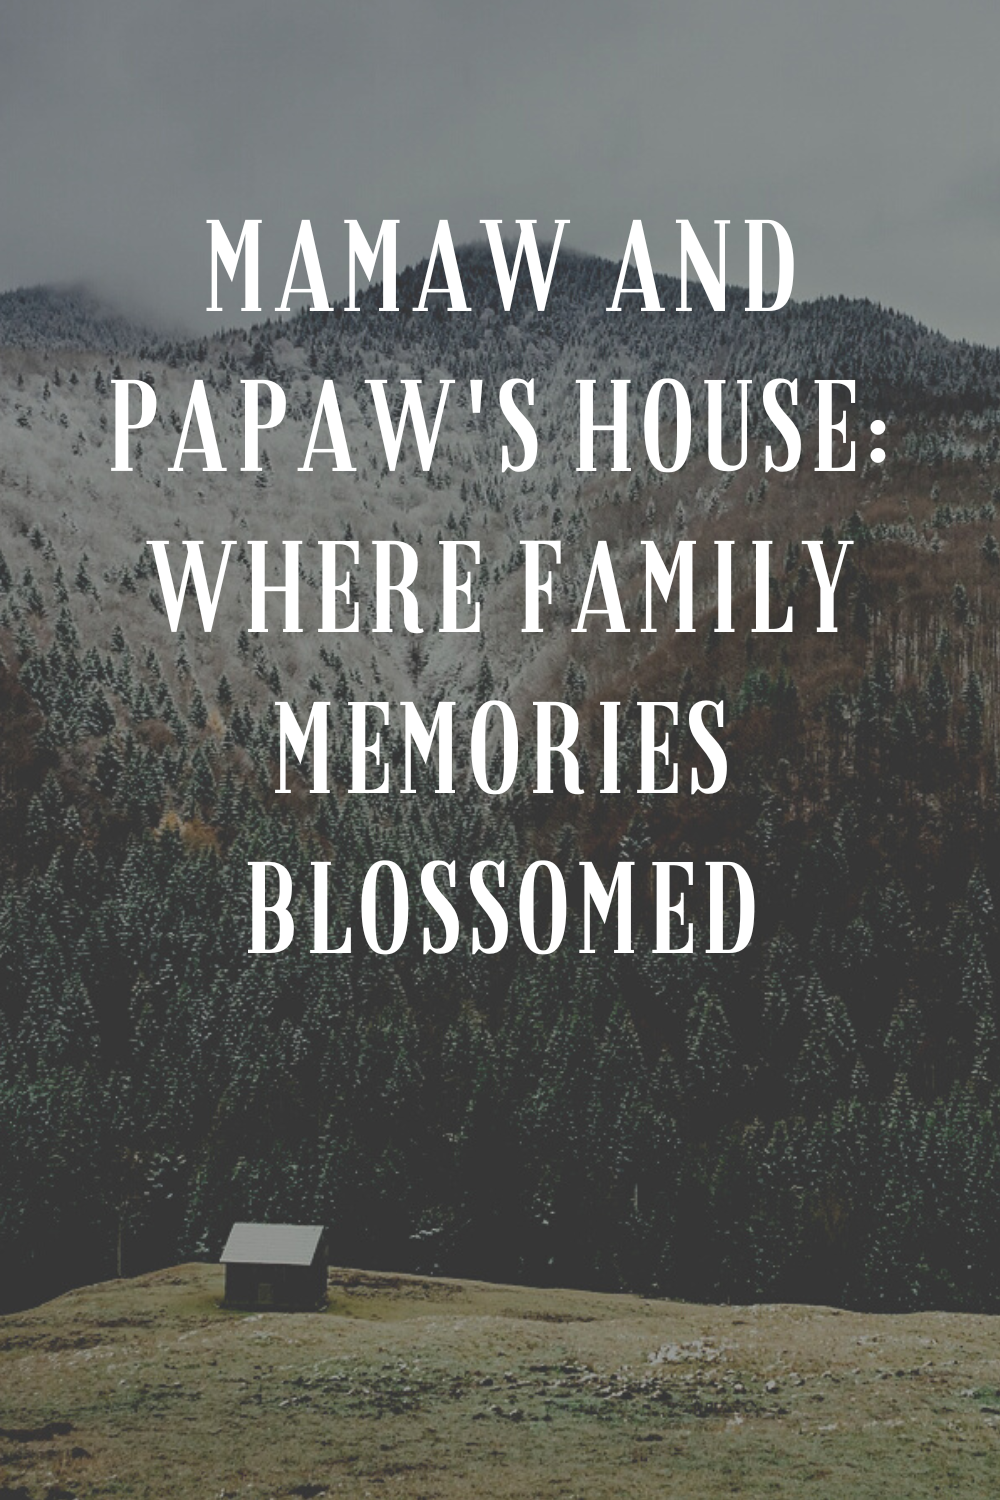 Mamaw and Papaw’s House: Where Family Memories Blossomed